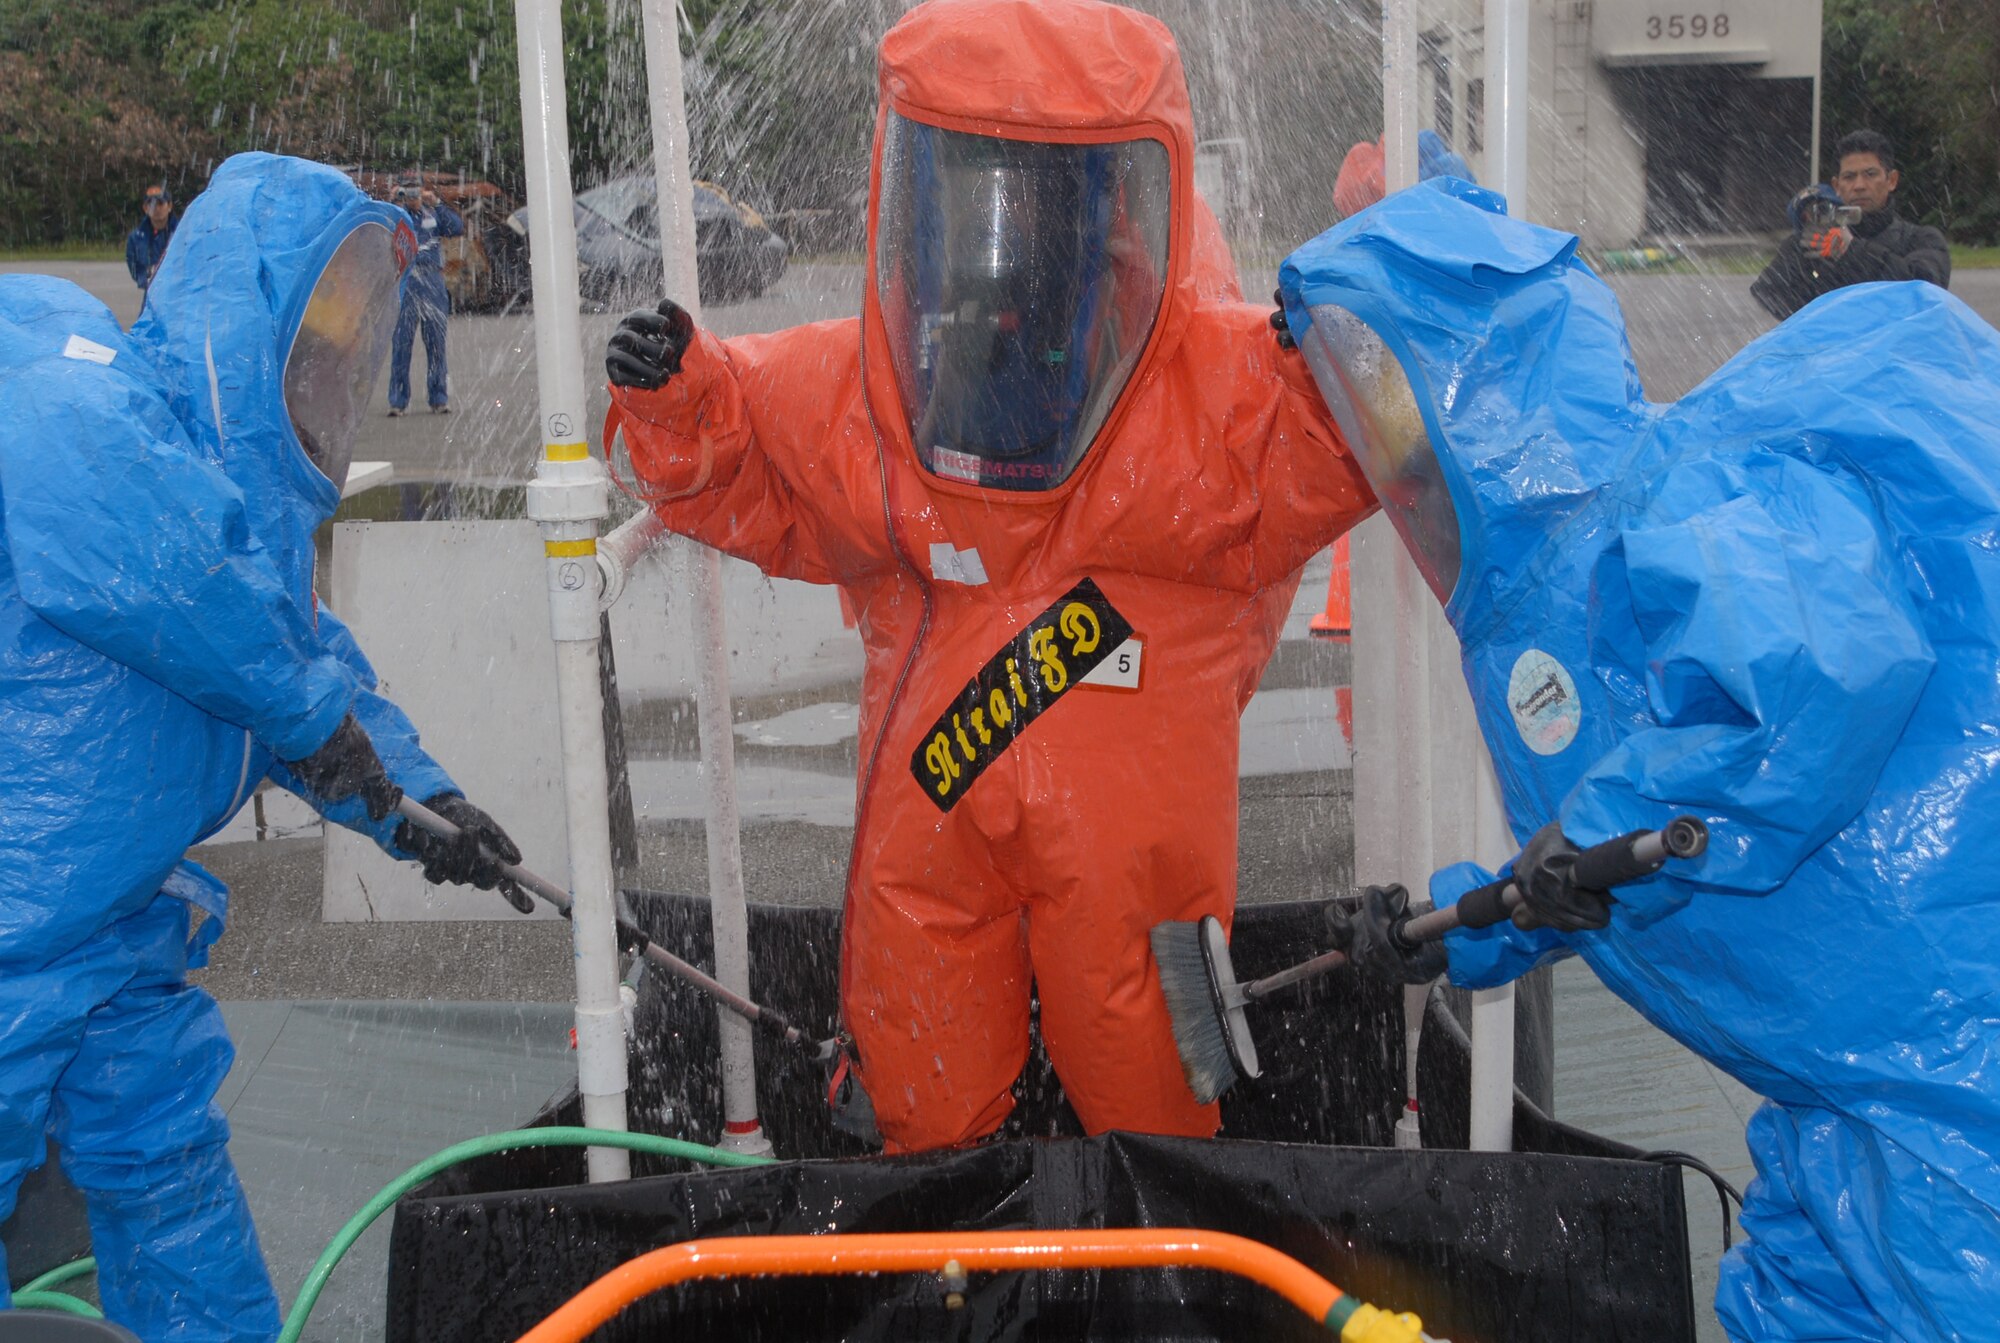 Members of the Kadena Fire Department (blue hazardous material suits) wash off a Nirai firefighter as he transitions out of a simulated chemically contaminated zone during a joint training exercise at Kadena Air Base, Japan, Feb. 14, 2008. These joint training exercises allow Kadena and Nirai fire department personnel to gain further understanding of each other's skills, and foster a better working relationship. (U.S. Air Force photo/Staff Sgt. Christopher Marasky)